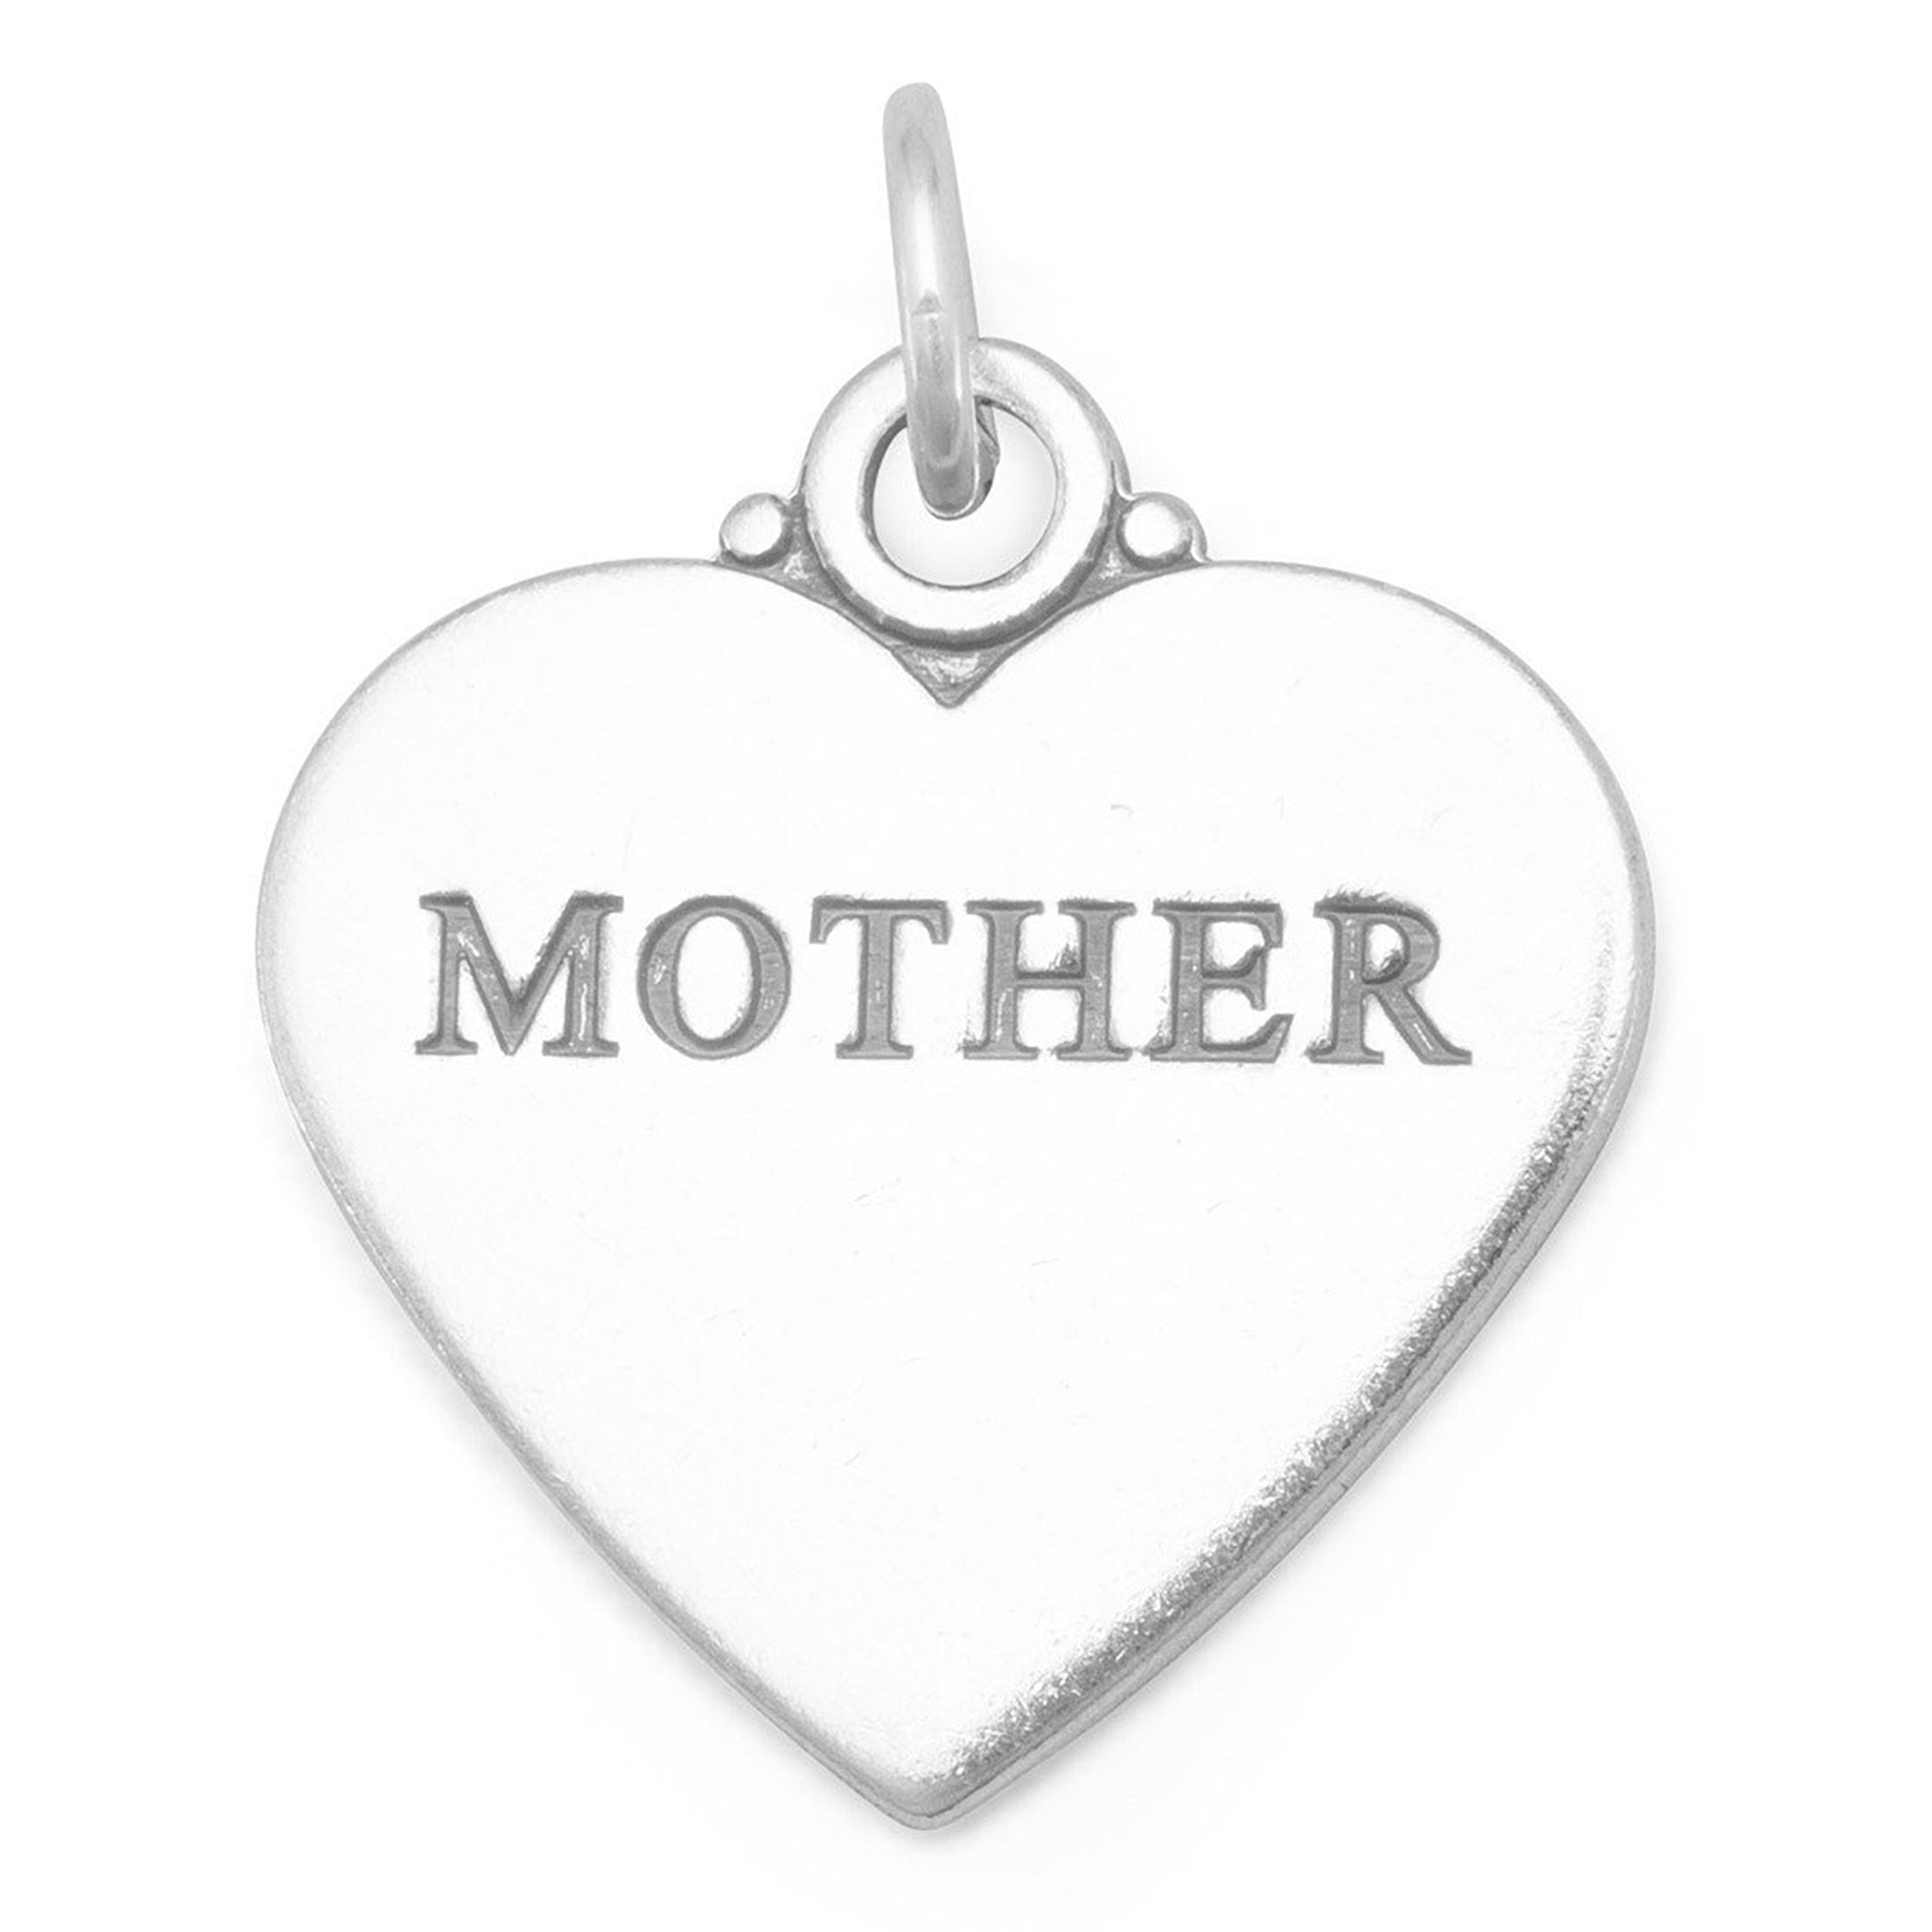 Mother Inscribed Heart Charm